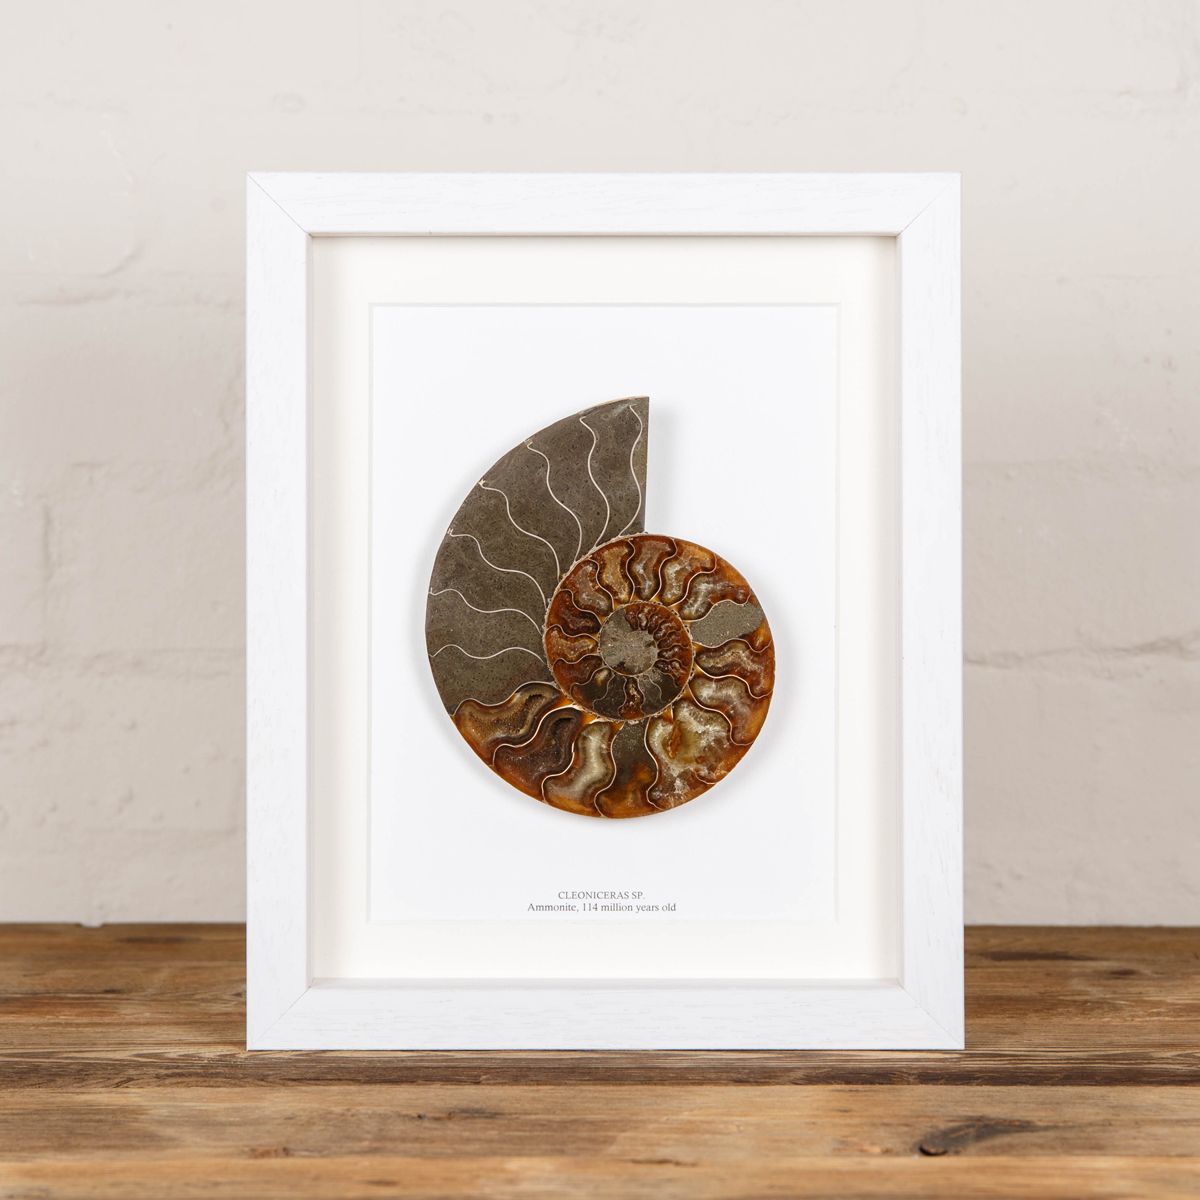 Cut and Polished Ammonite Fossil in Box Frame (Cleoniceras sp) 10 x 8